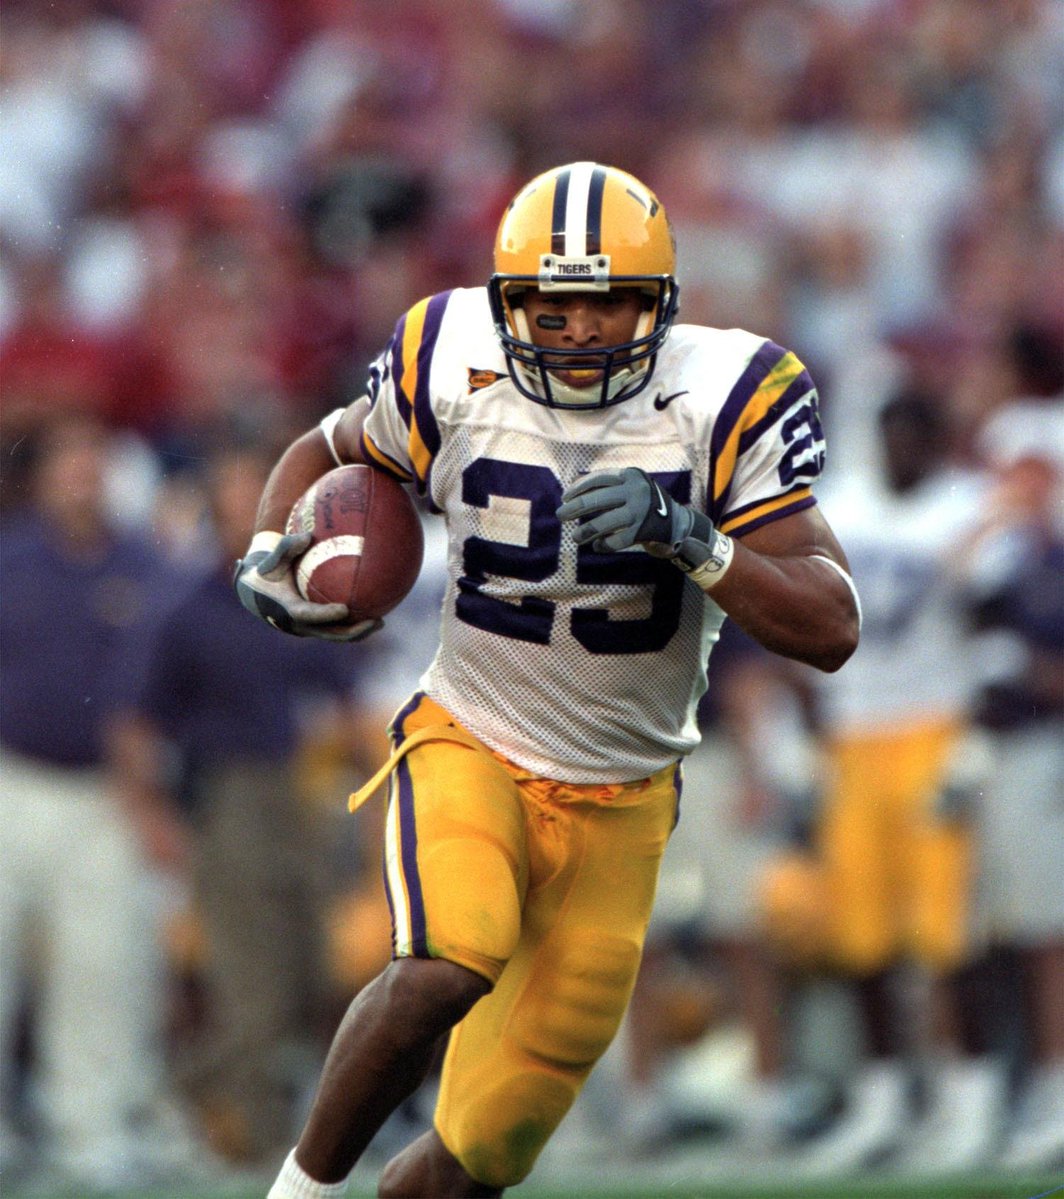 Happy 44th birthday to Josh Reed! 2001 Biletnikoff Award winner & All-American. Reed held the LSU record for career rec yds (3,001) until Malik Nabers broke it this past season. Still holds the SEC record for receptions in a game with 19 against Alabama in 2001.